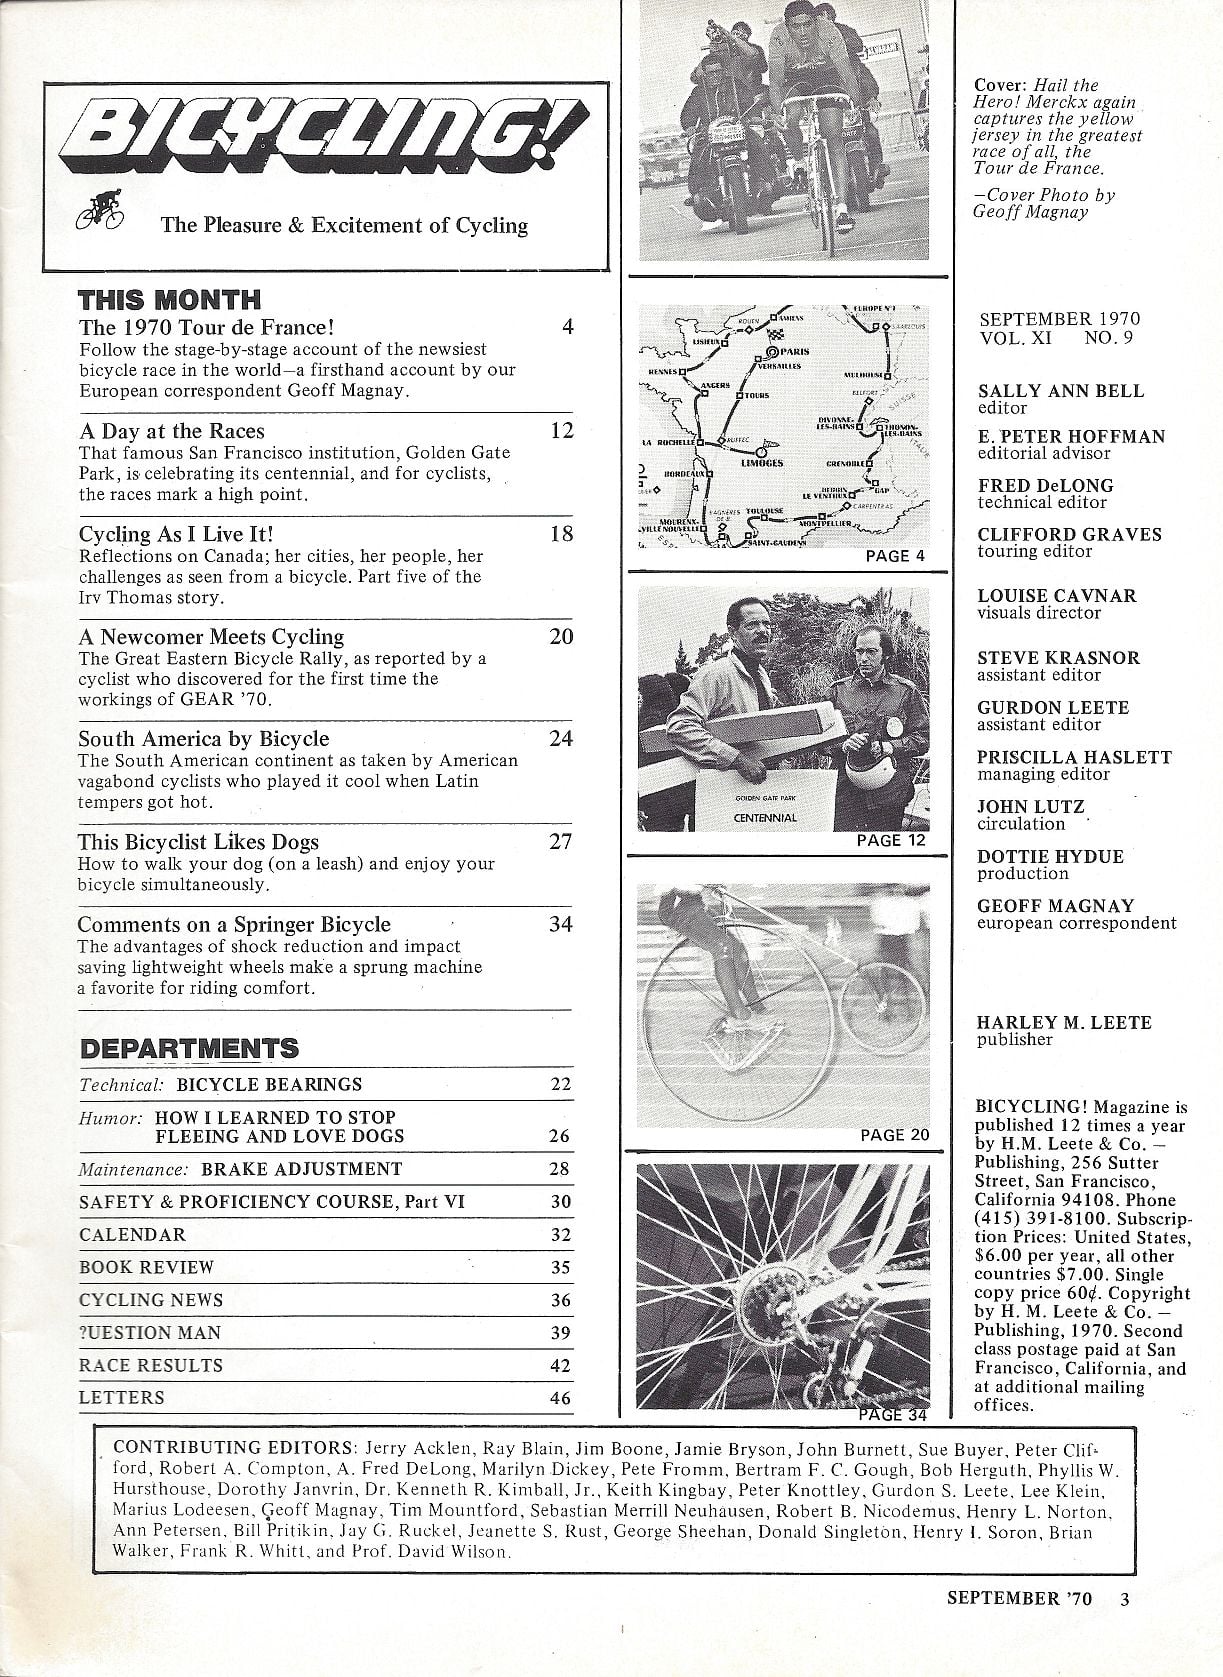 50 Years Ago: September 1970 in Bicycling! magazine - Bike Forums